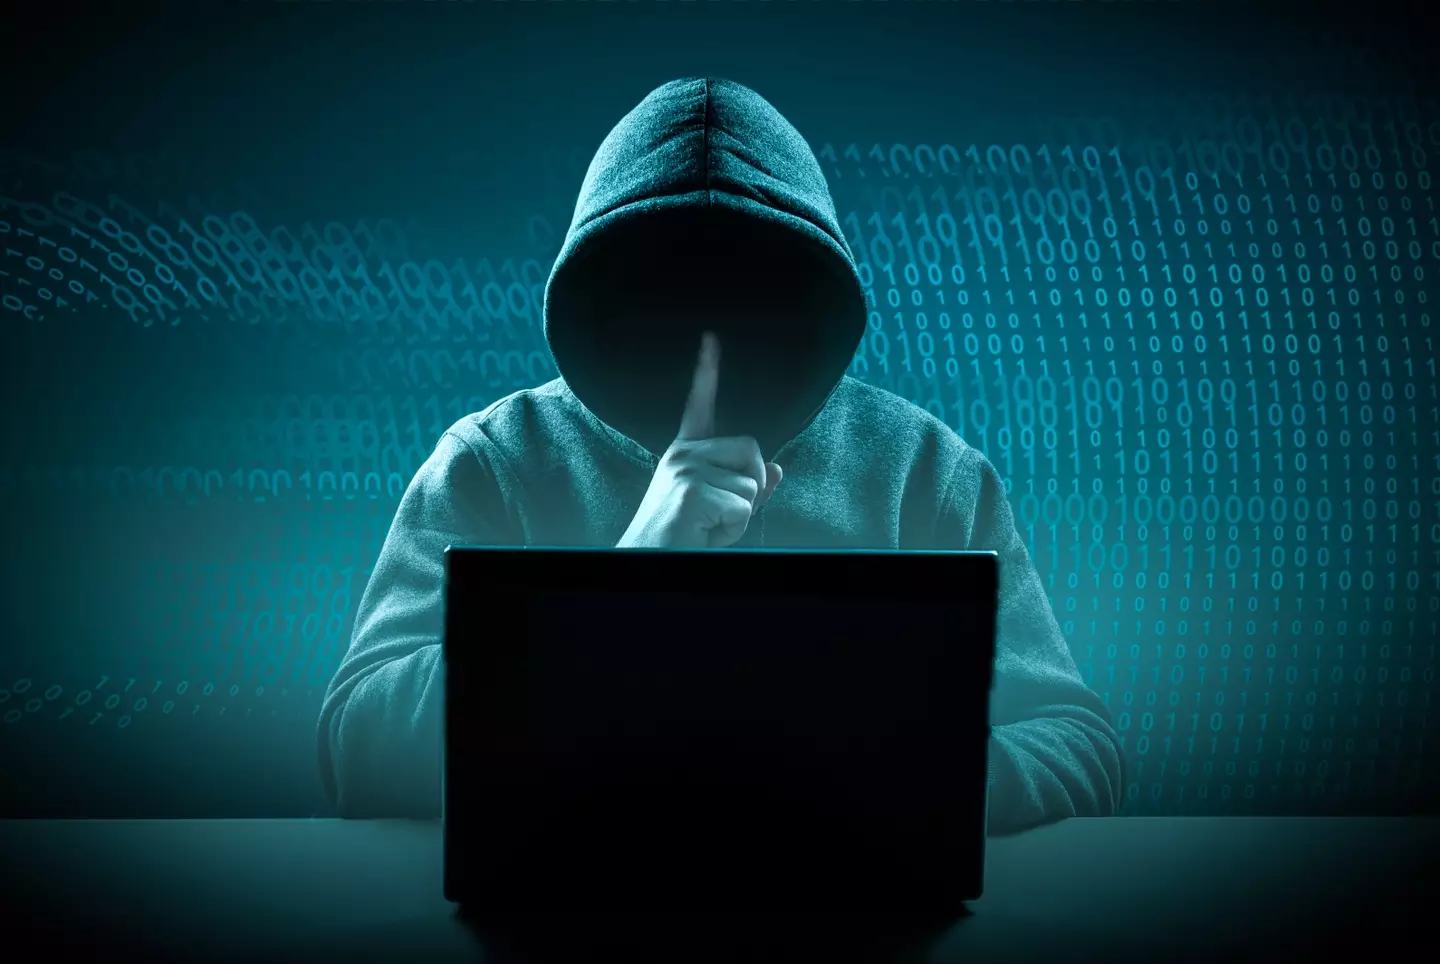 Hackers are selling accounts on the dark web for less than 40 pence each.